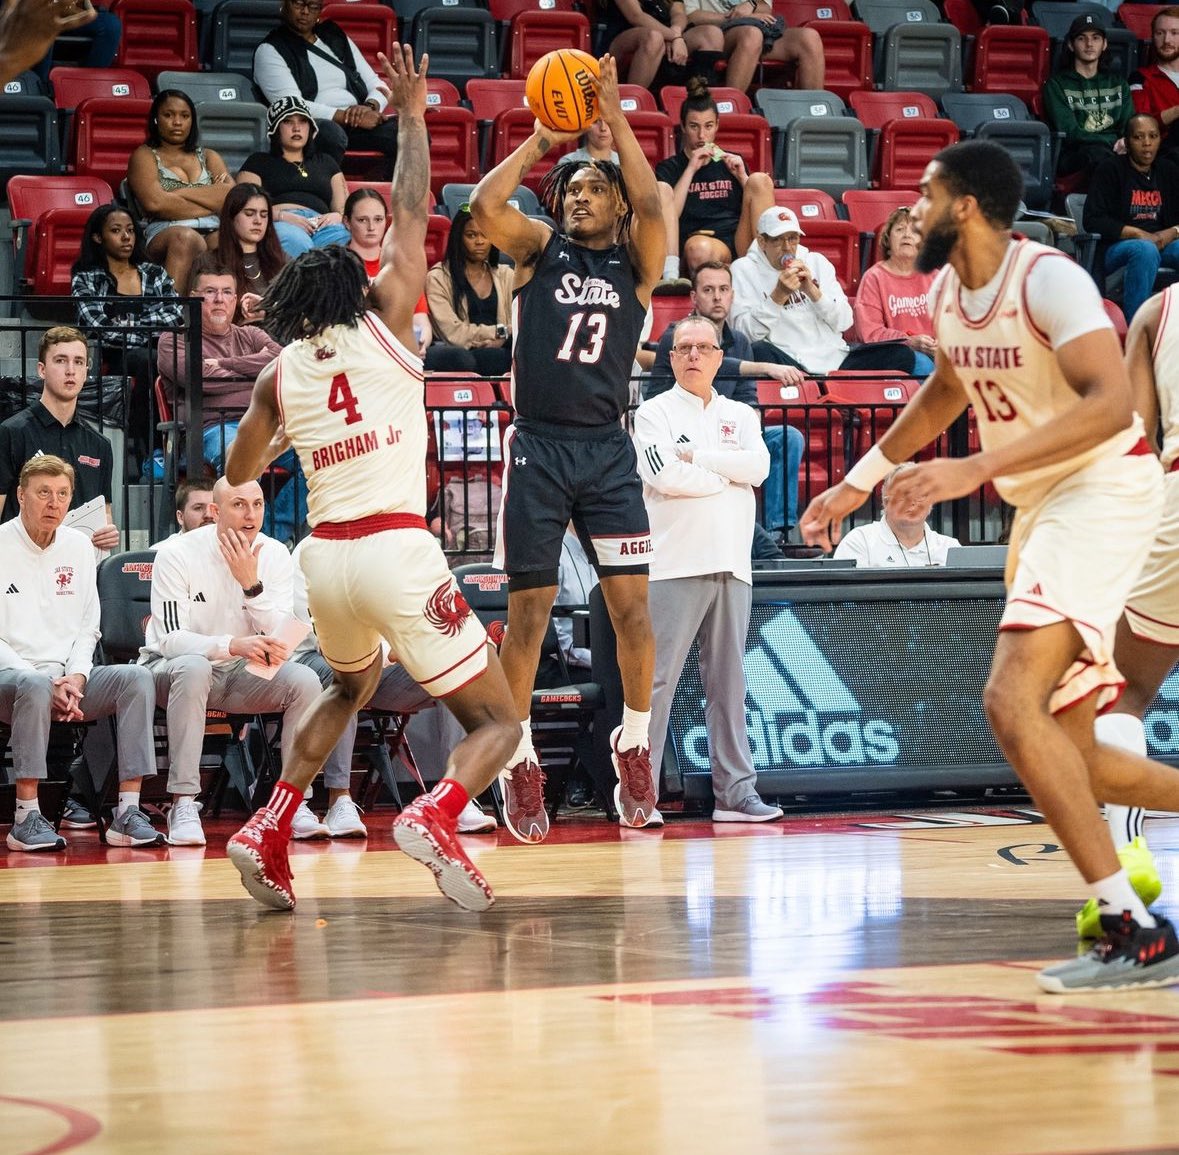 The Aggies struggled on the road this season, but they were still able to win the final one of the season. In one of the most intense games of the season, they beat Jacksonville State 66-64.
(Photo courtesy @NMStateAggies)
#AggieUp | #Throwback | @nmsu | @NMStateMBB